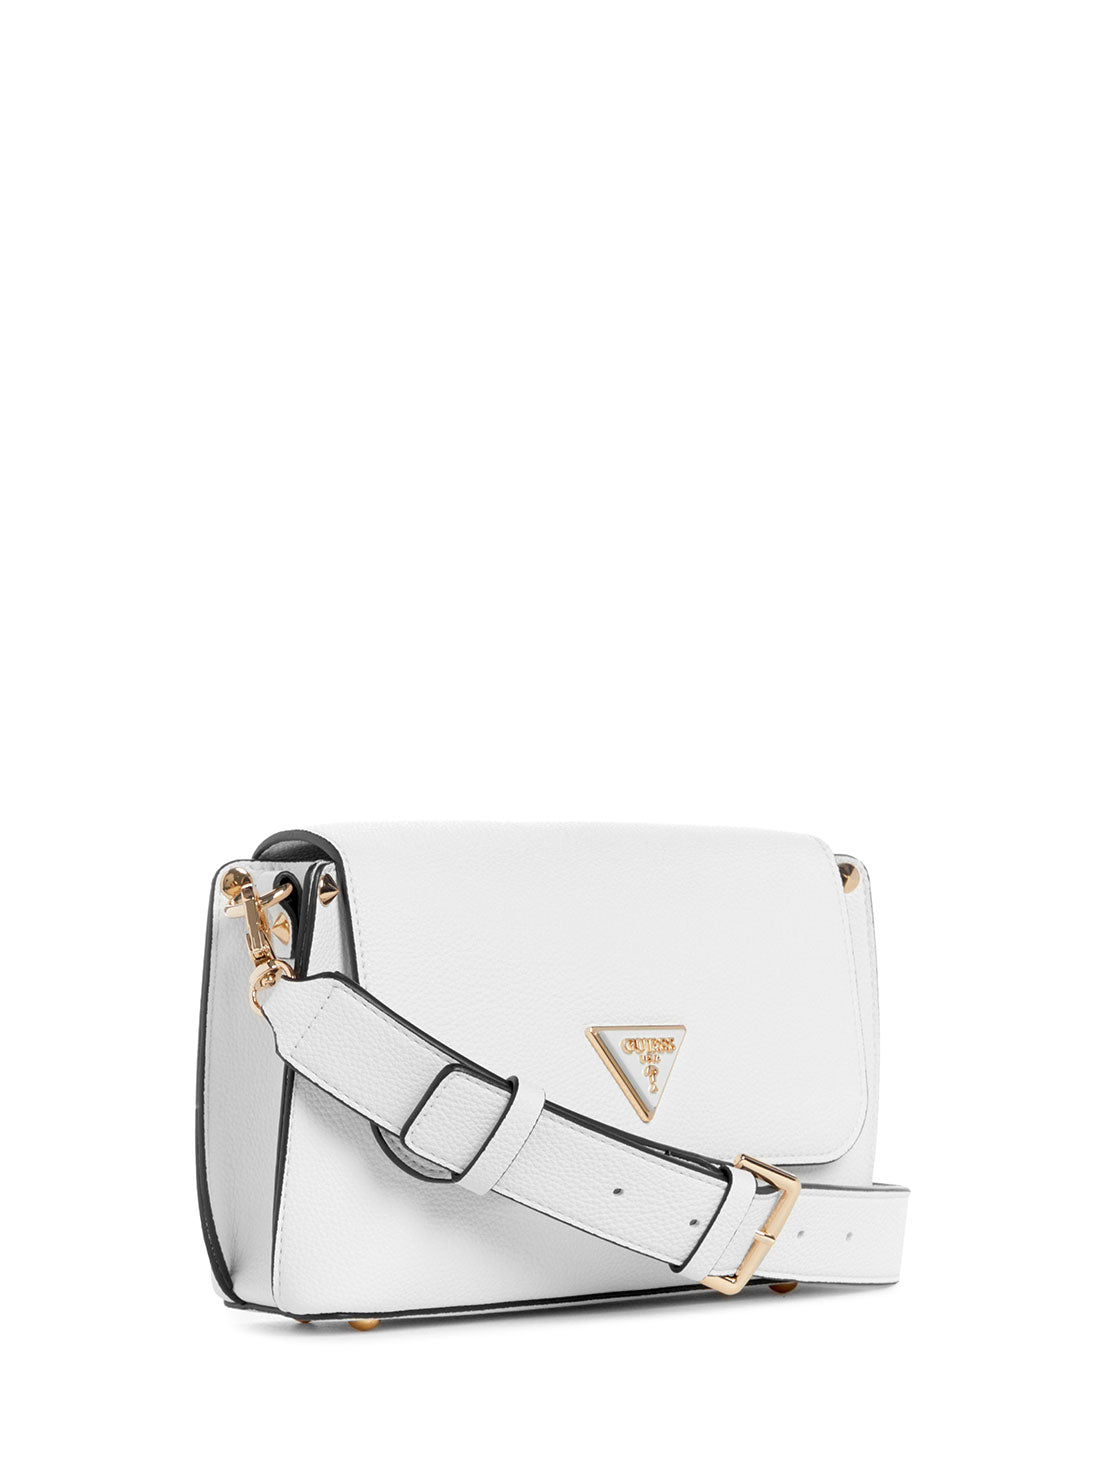 GUESS White Meridian Shoulder Bag side view